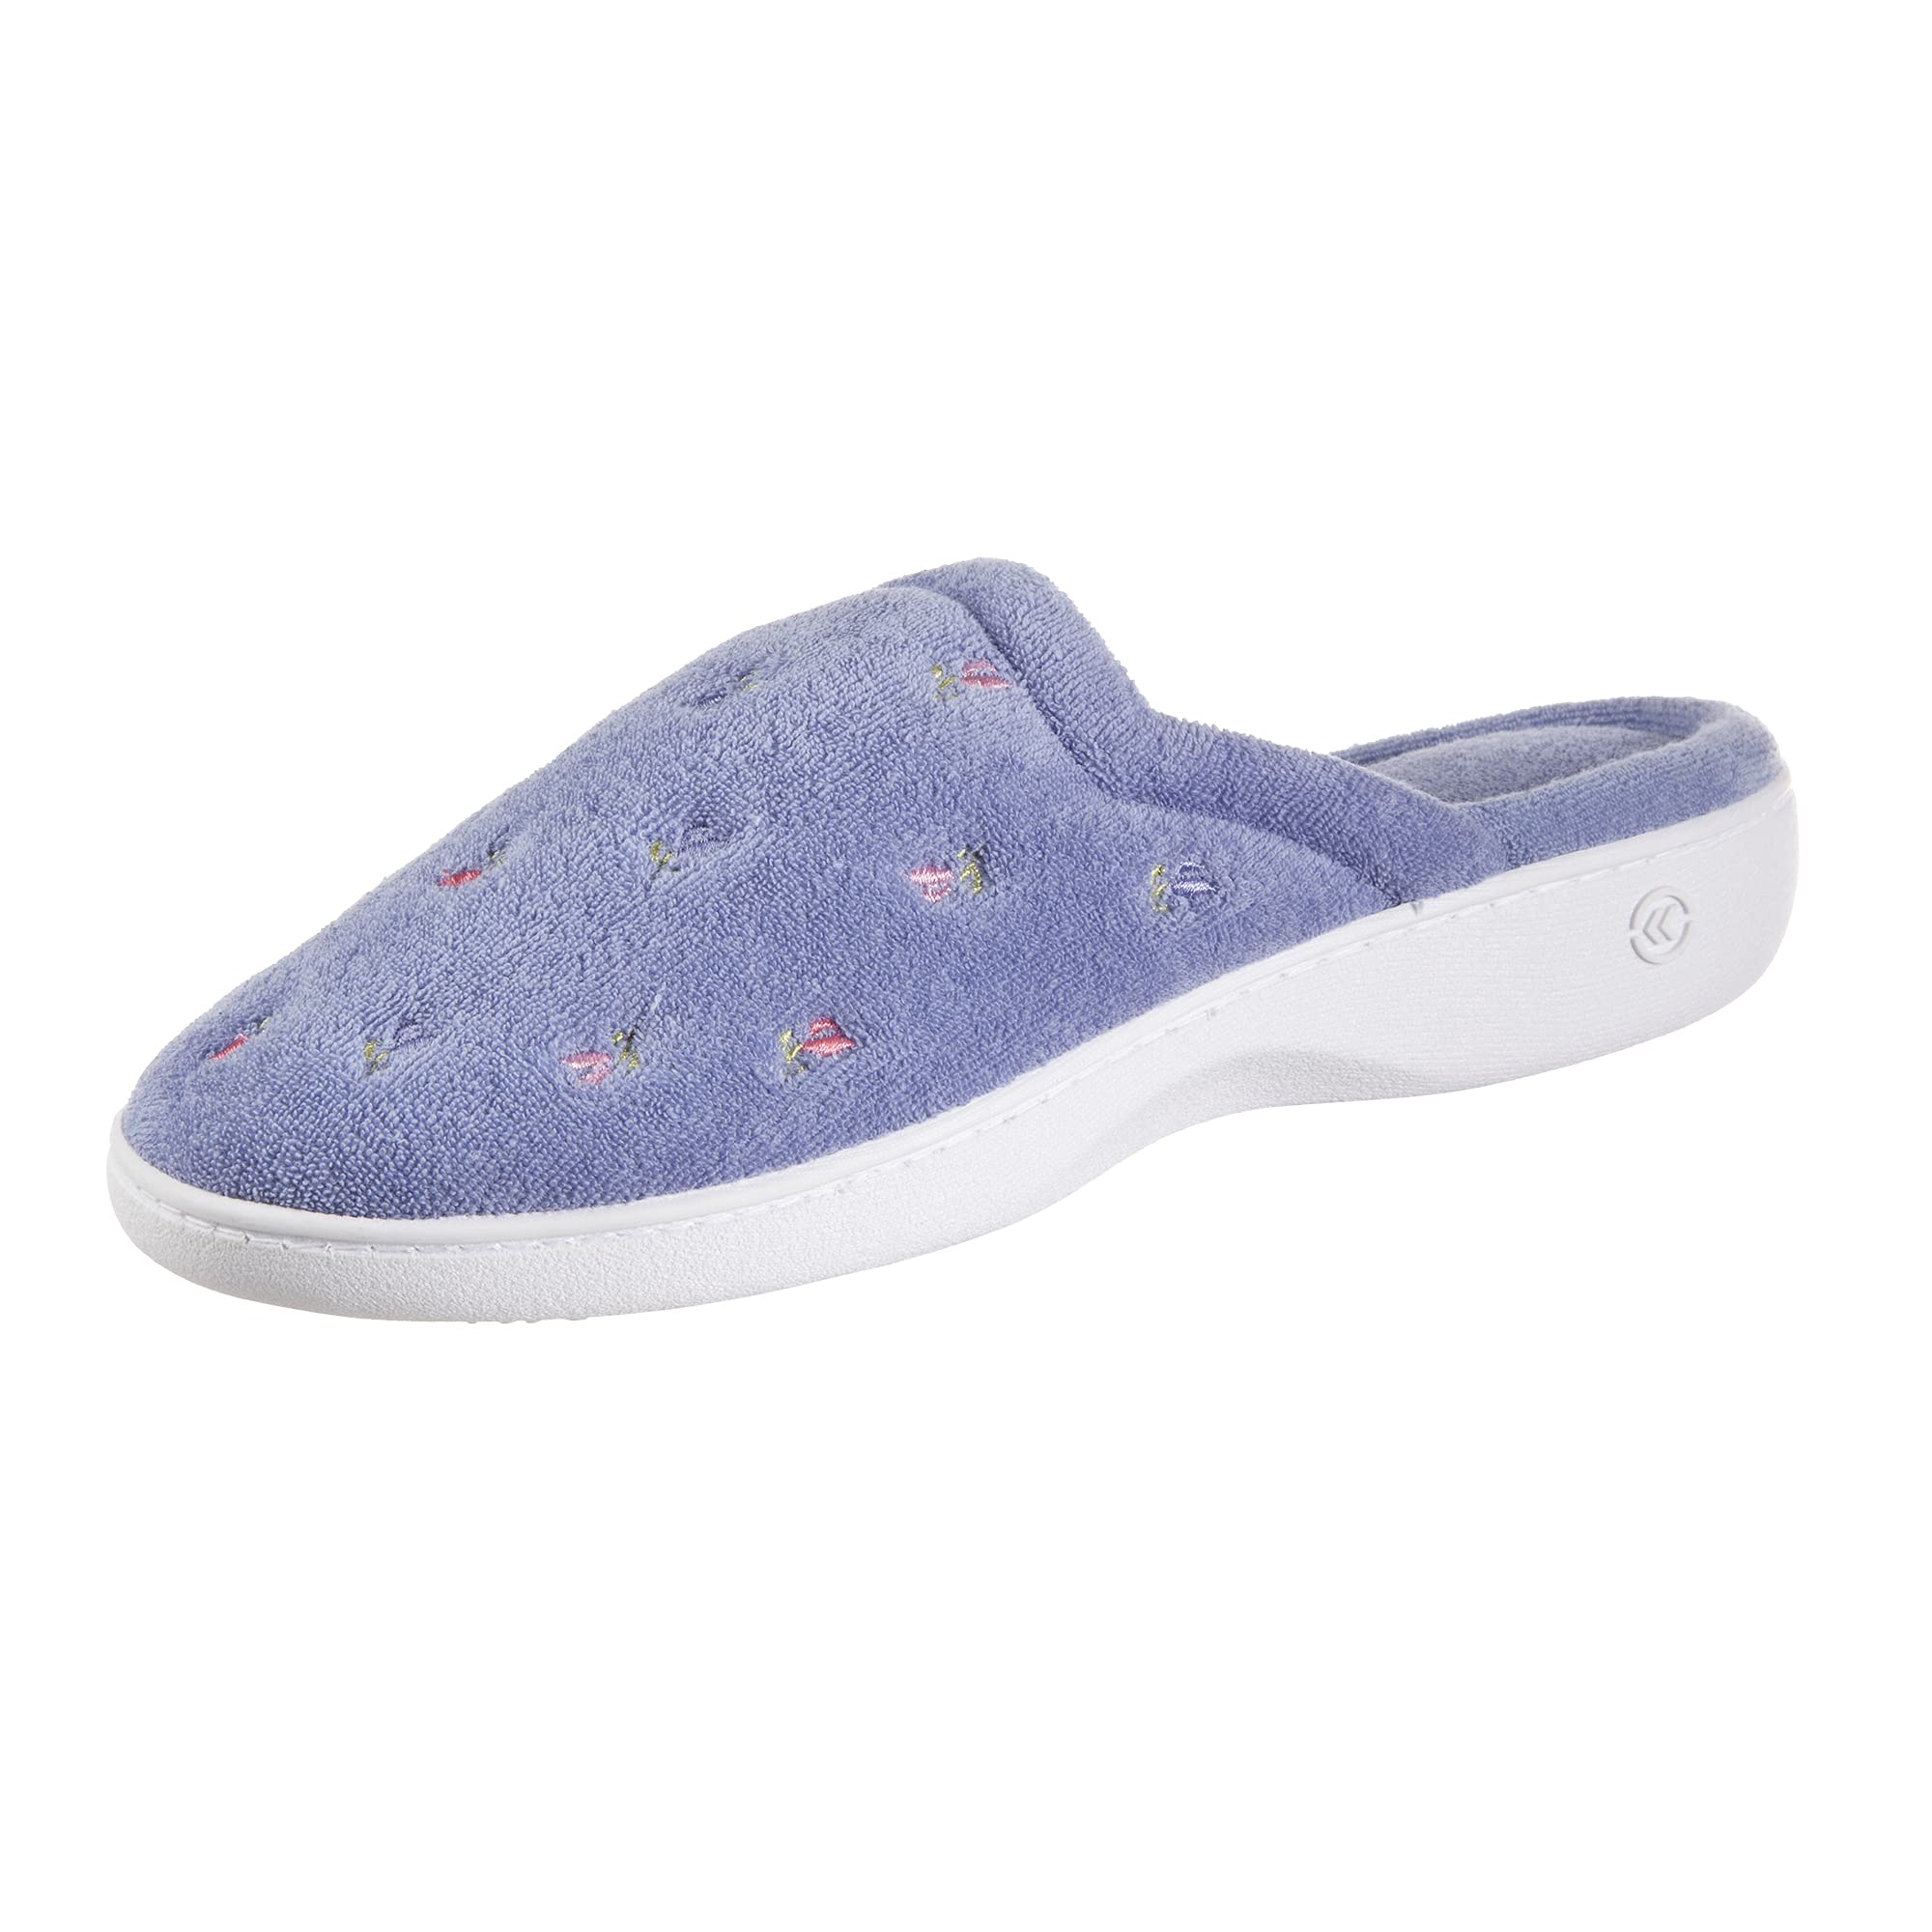 isotoner womens TerryAslip clog With Memory Foam for IndoorOutdoor comfort Slip on Slipper, Periwinkle Scalloped, 85-9 US